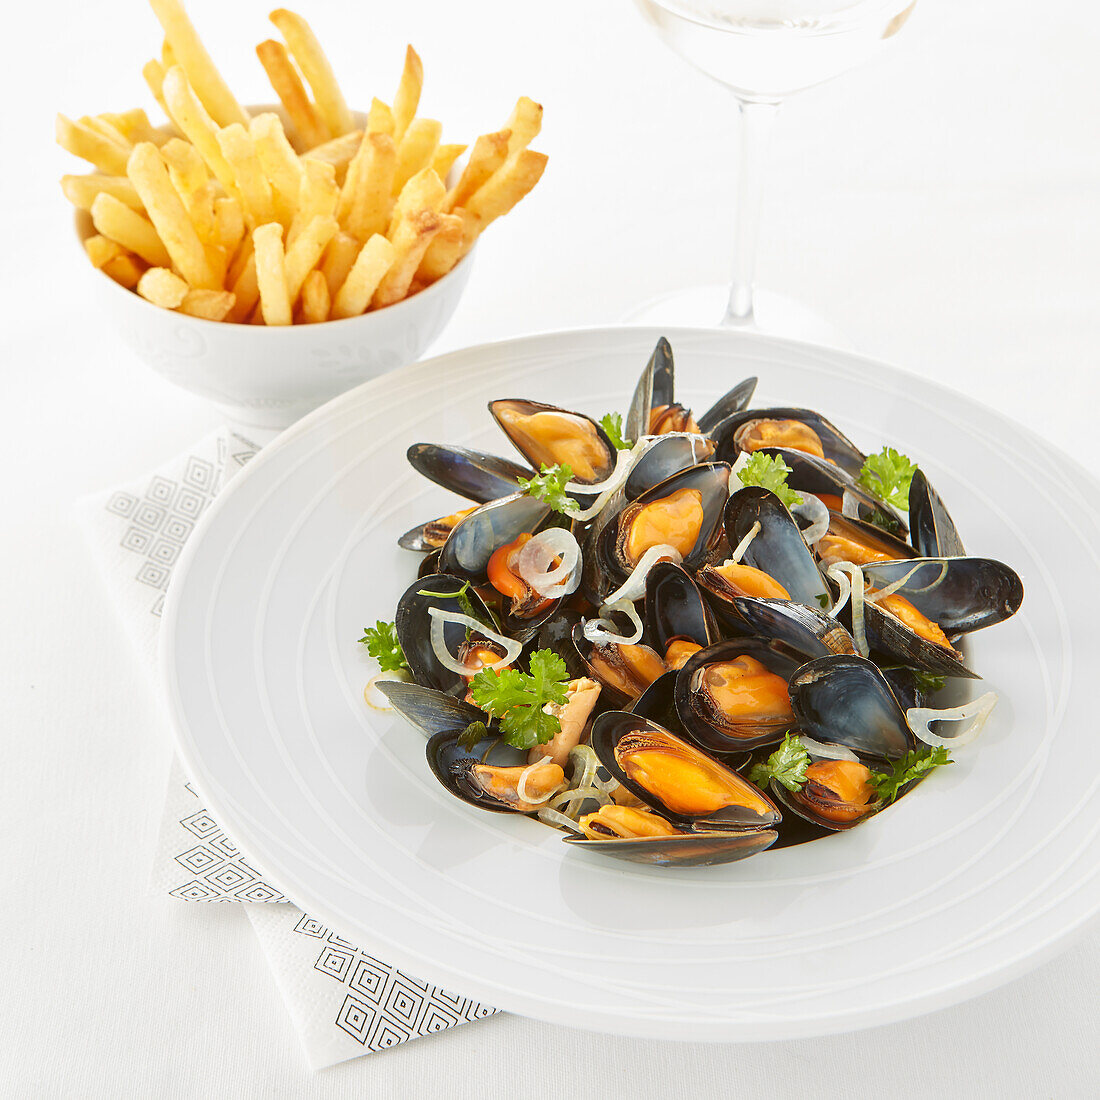 Moules marinières with french fries